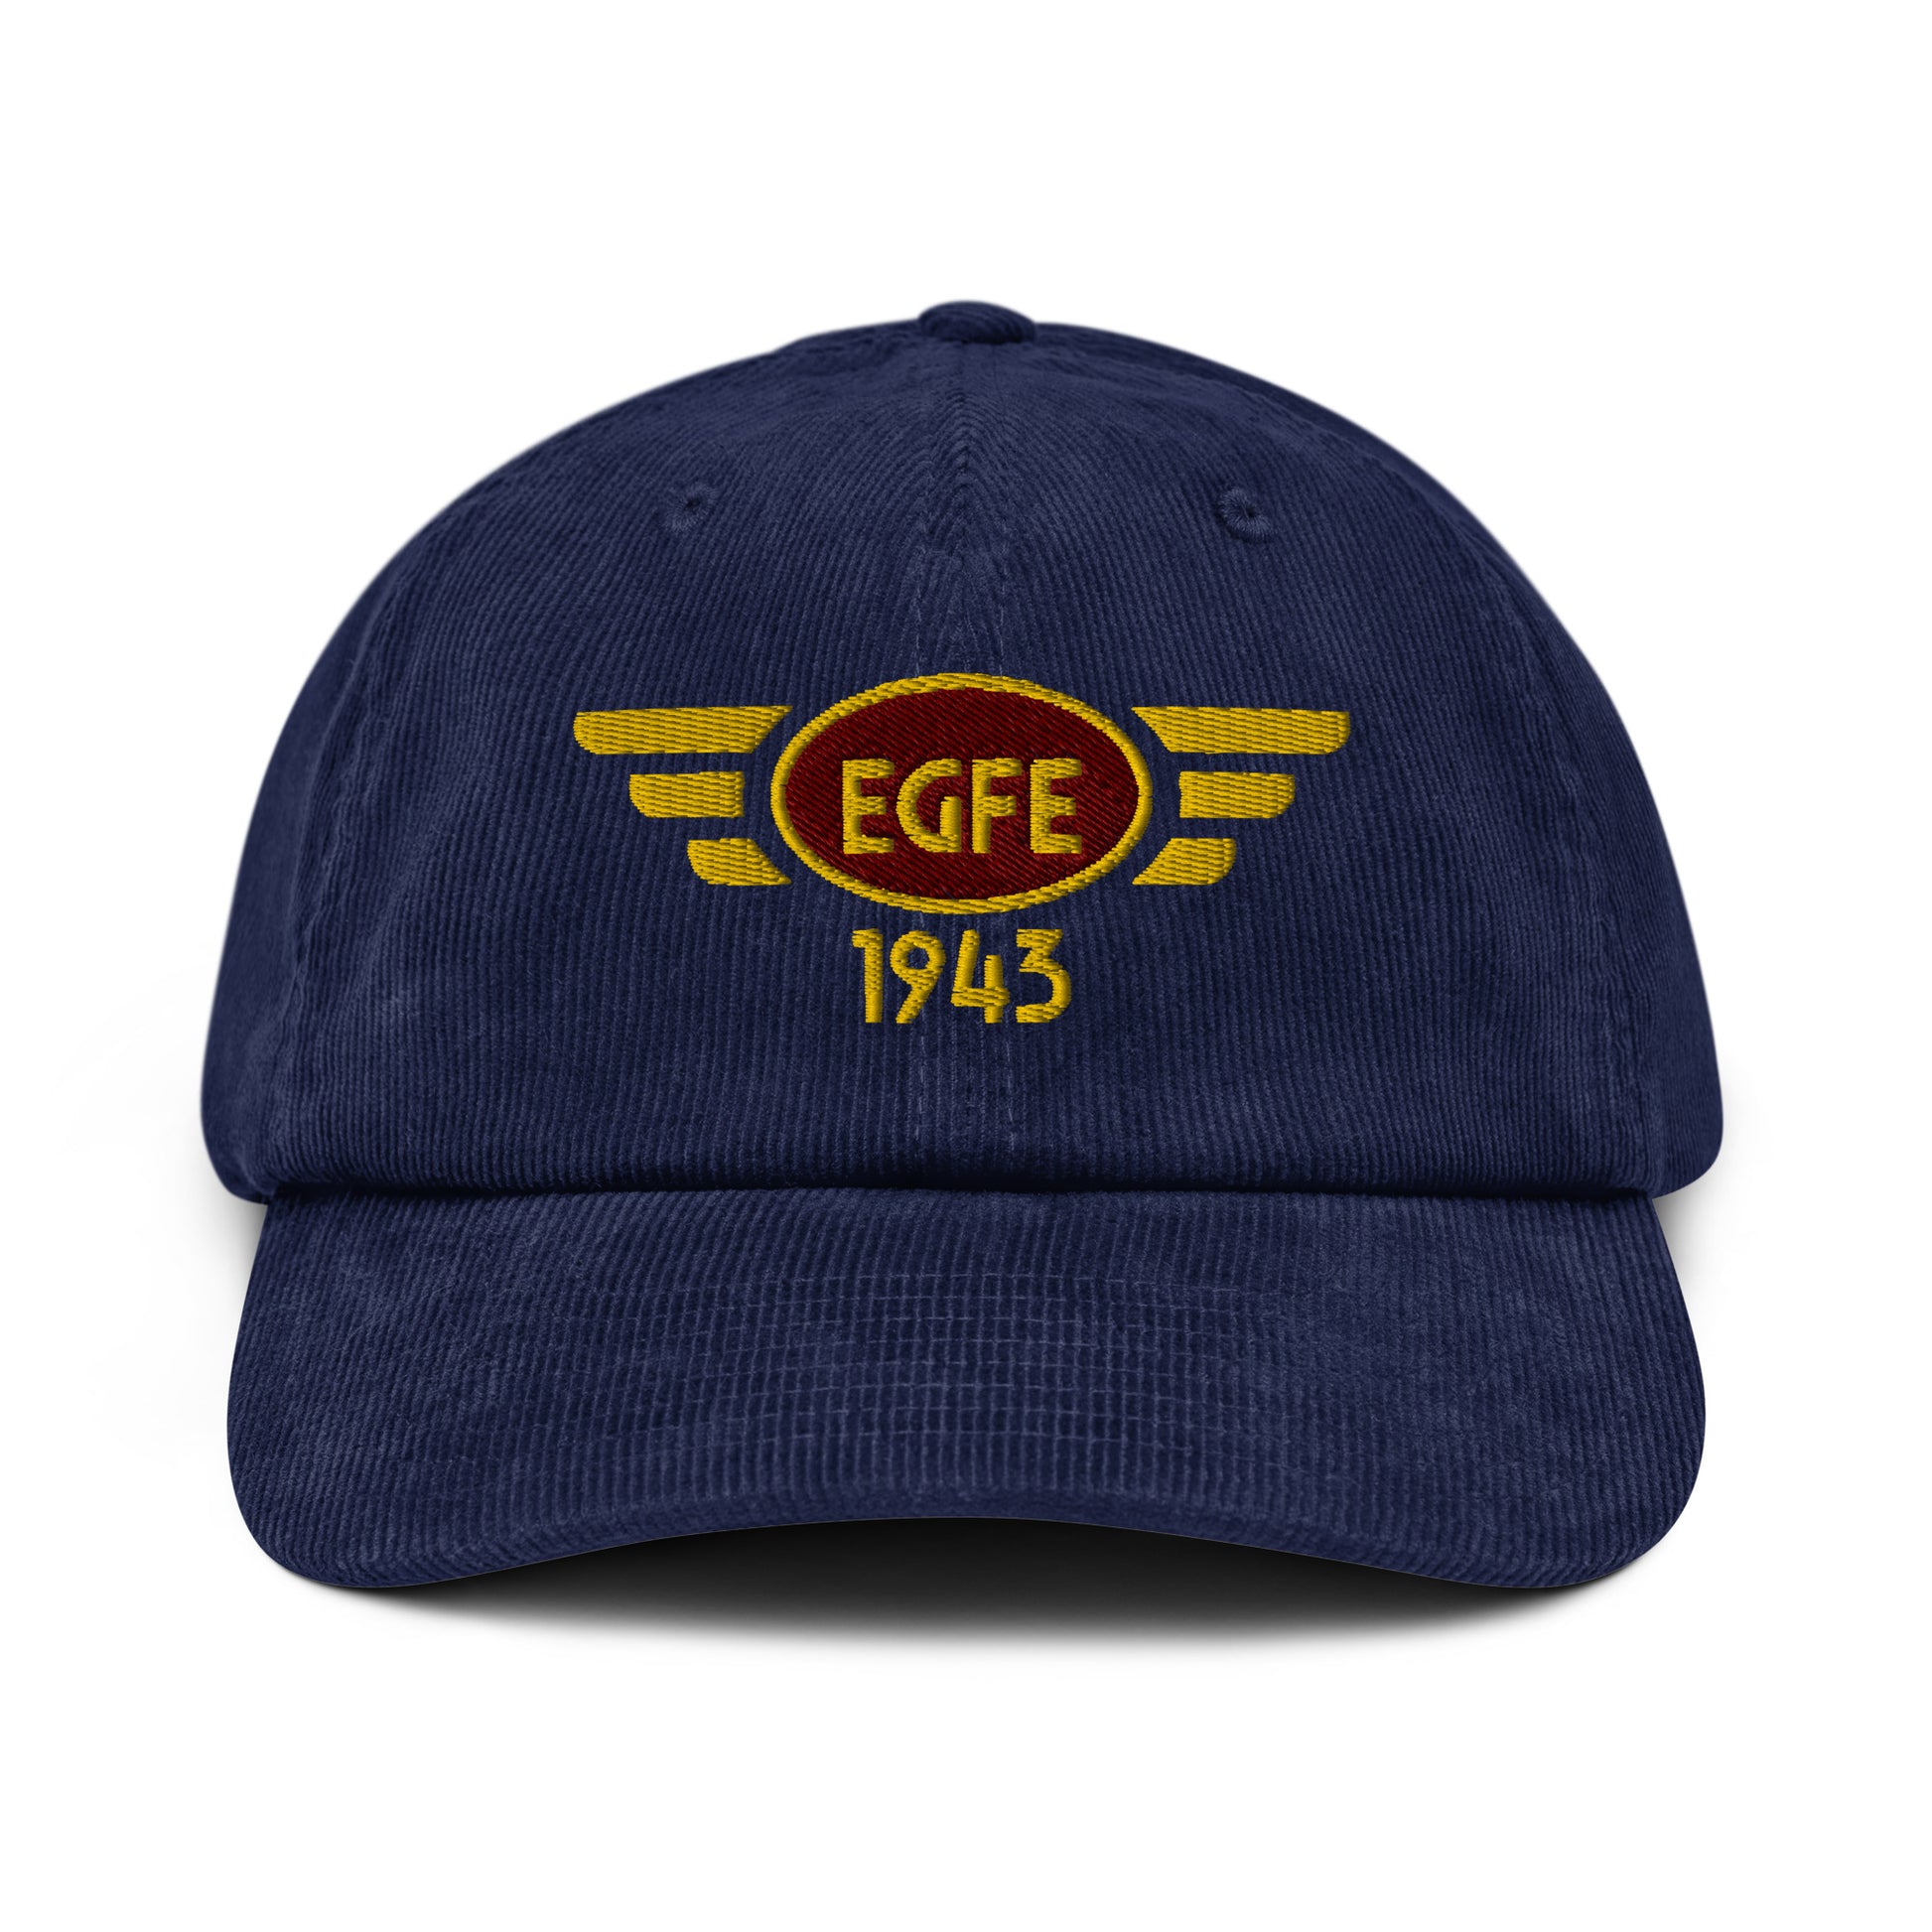 Oxford navy blue coloured corduroy baseball cap with embroidered vintage style aviation logo for Haverfordwest Airport.